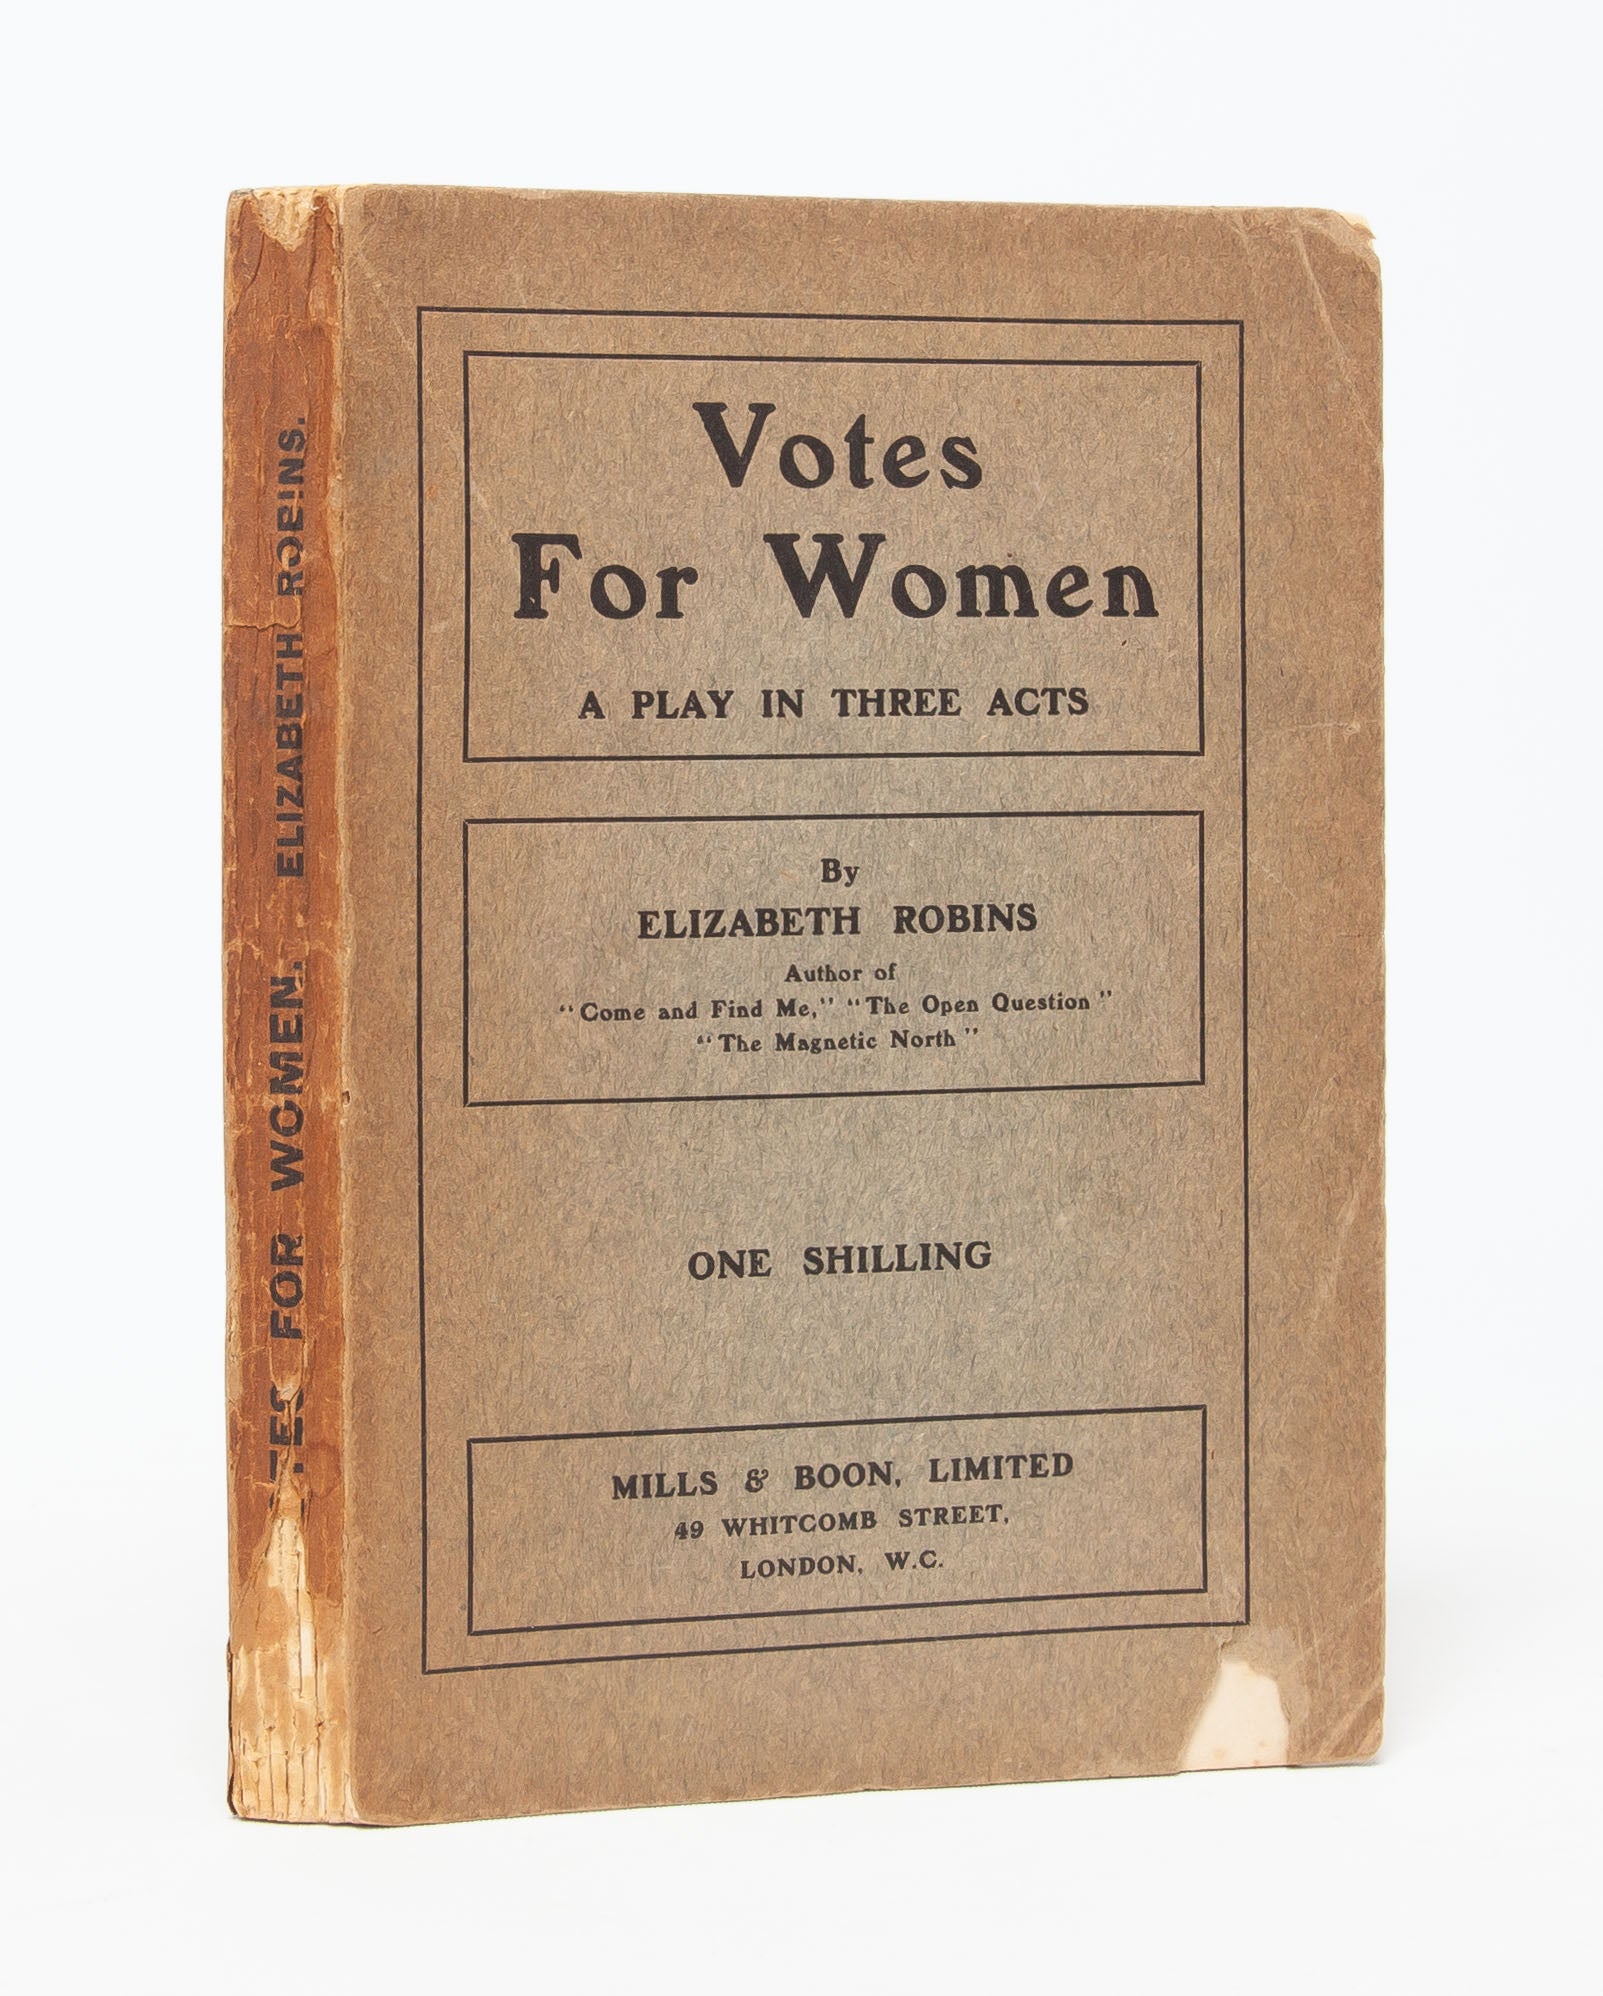 (Item #5800) Votes for Women. A Play in Three Acts. Women's Suffrage, Elizabeth Robins.